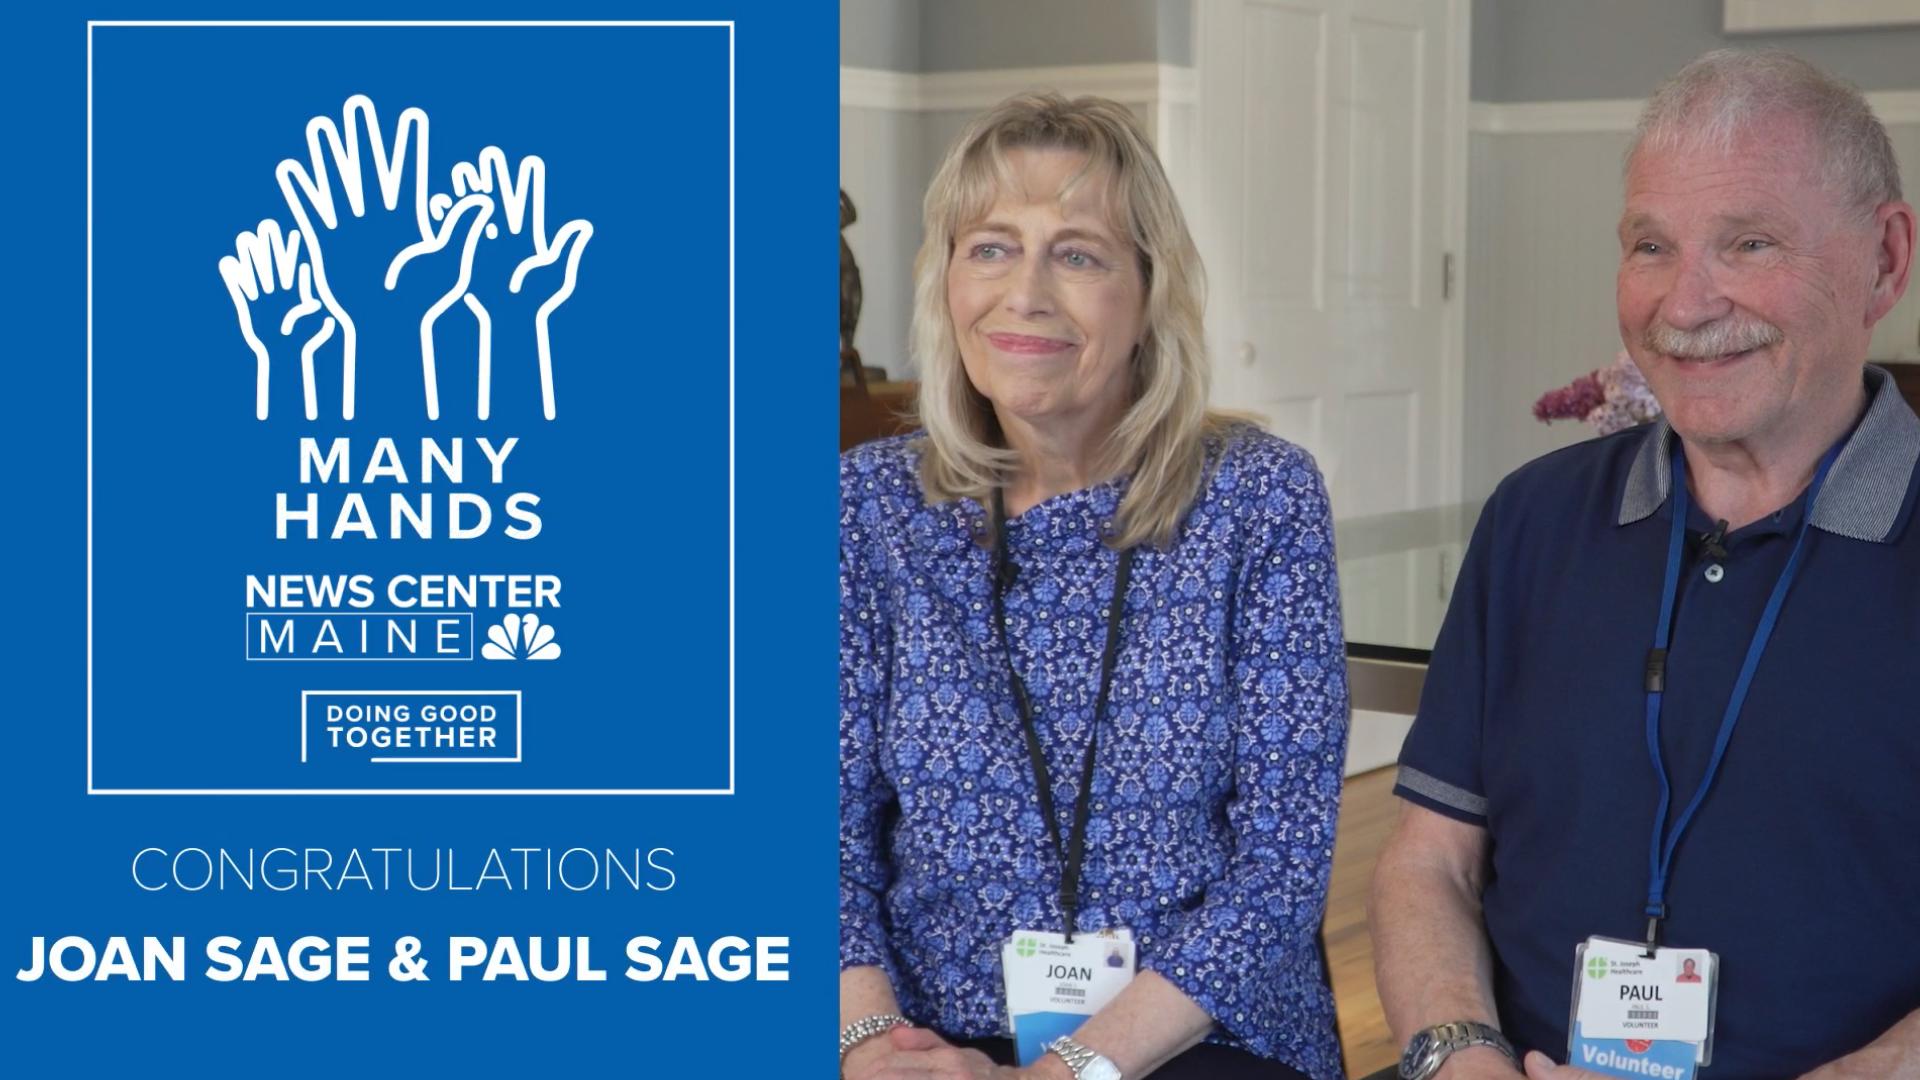 Joan and Paul Sage volunteer at St. Joseph Hospital in Bangor.  From escorting patients to procedures to changing beds, the Sages do it all.